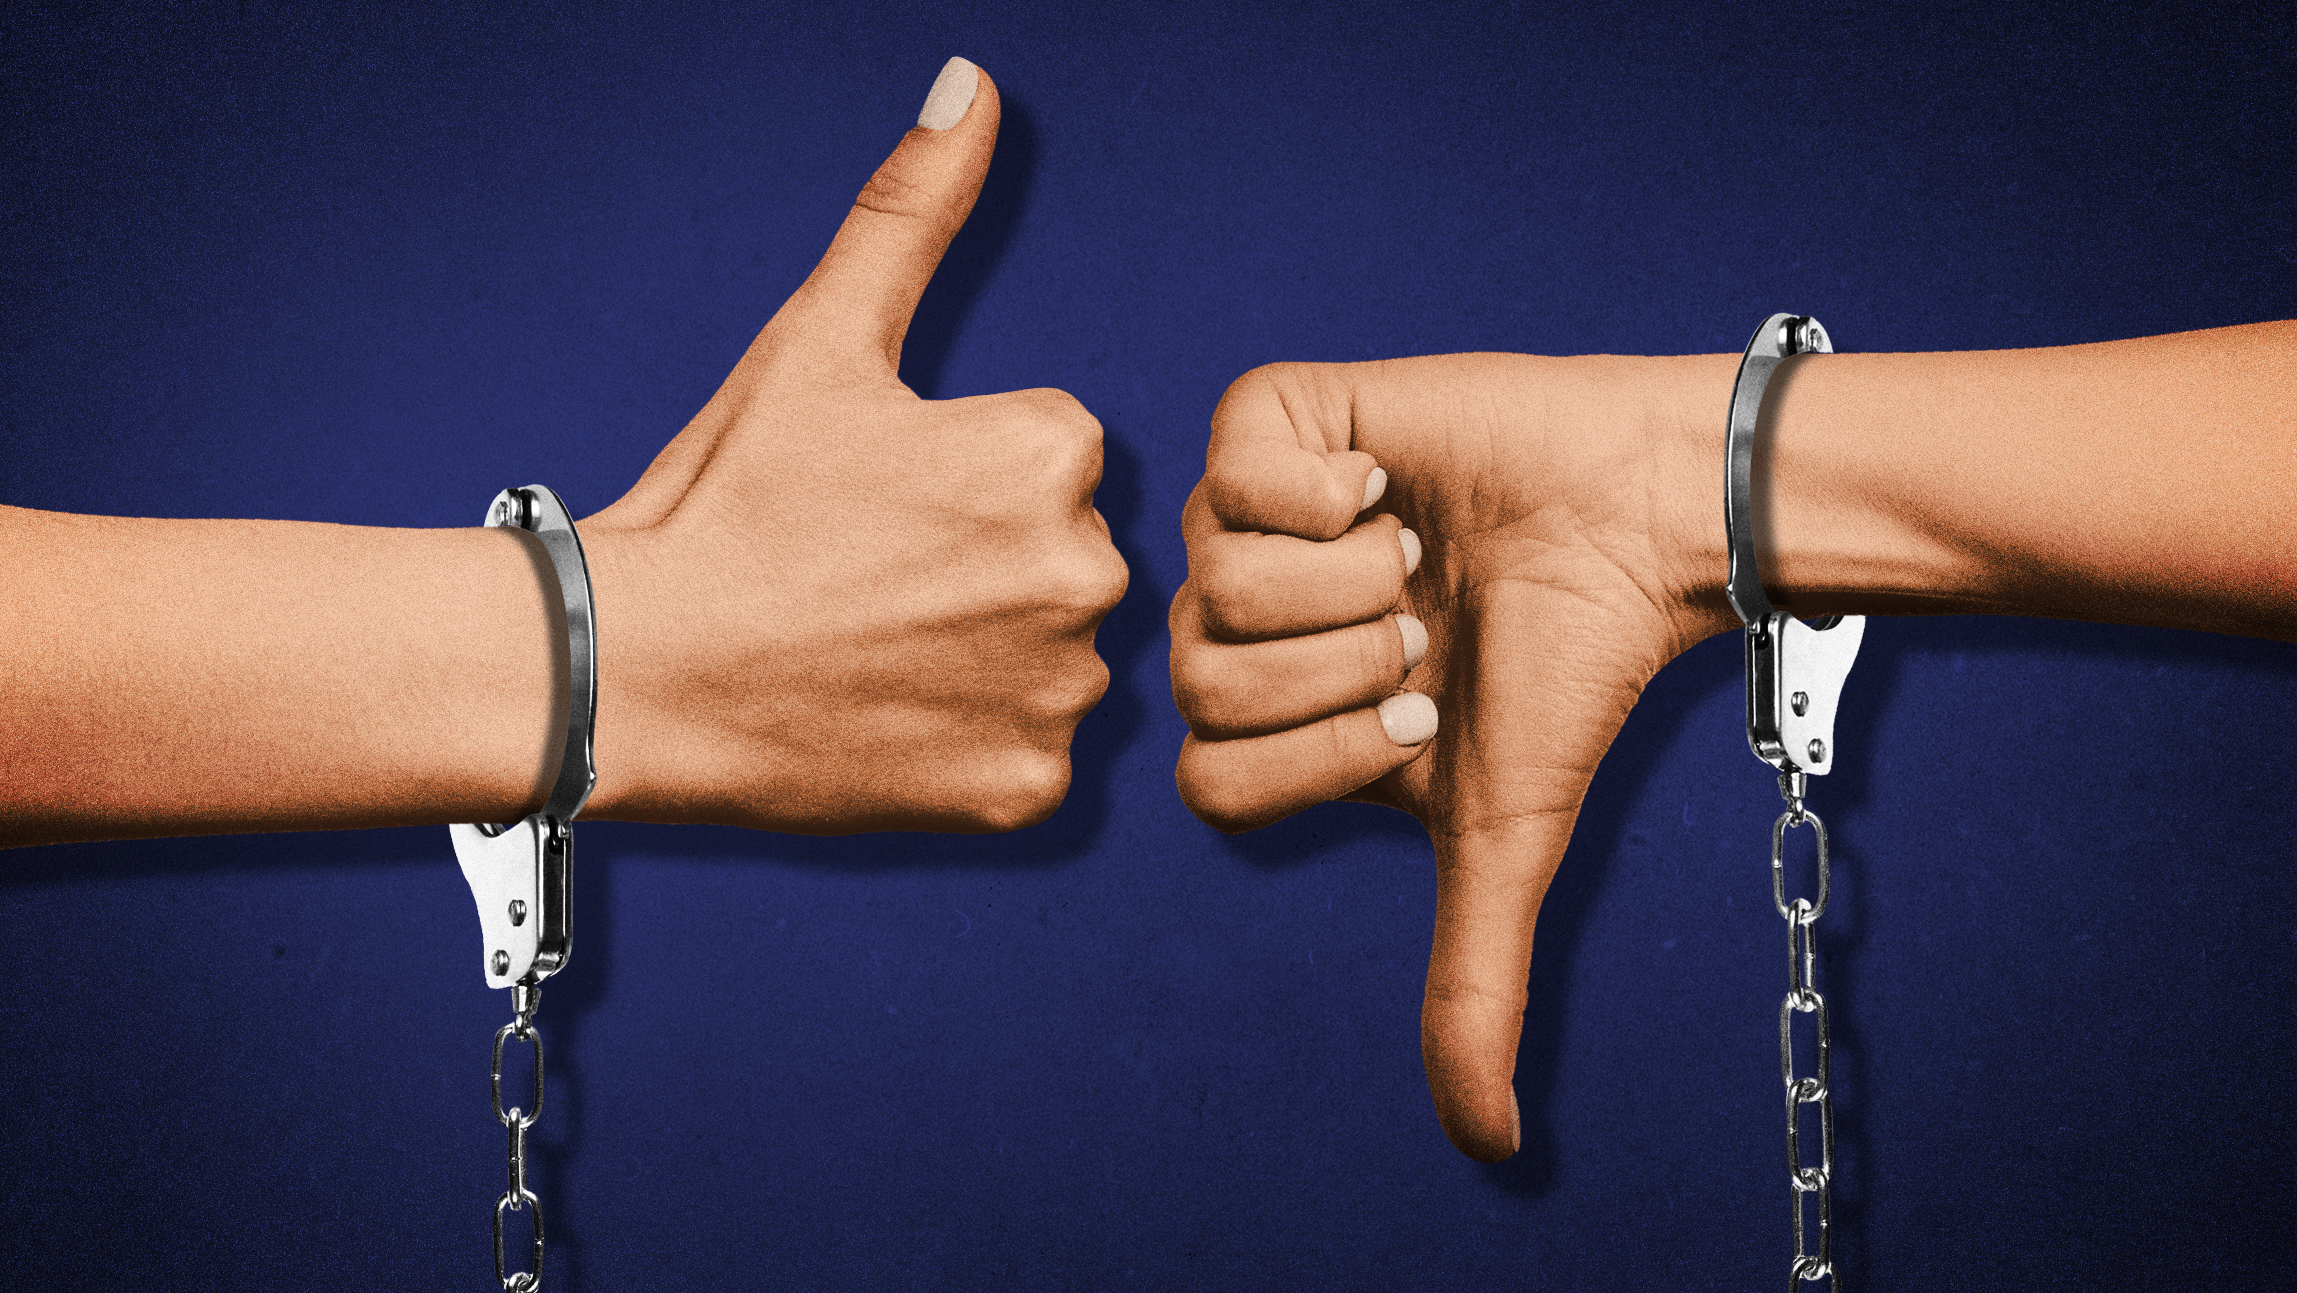 Two hands in cuffs, one giving a thumbs-up and the other giving a thumbs-down